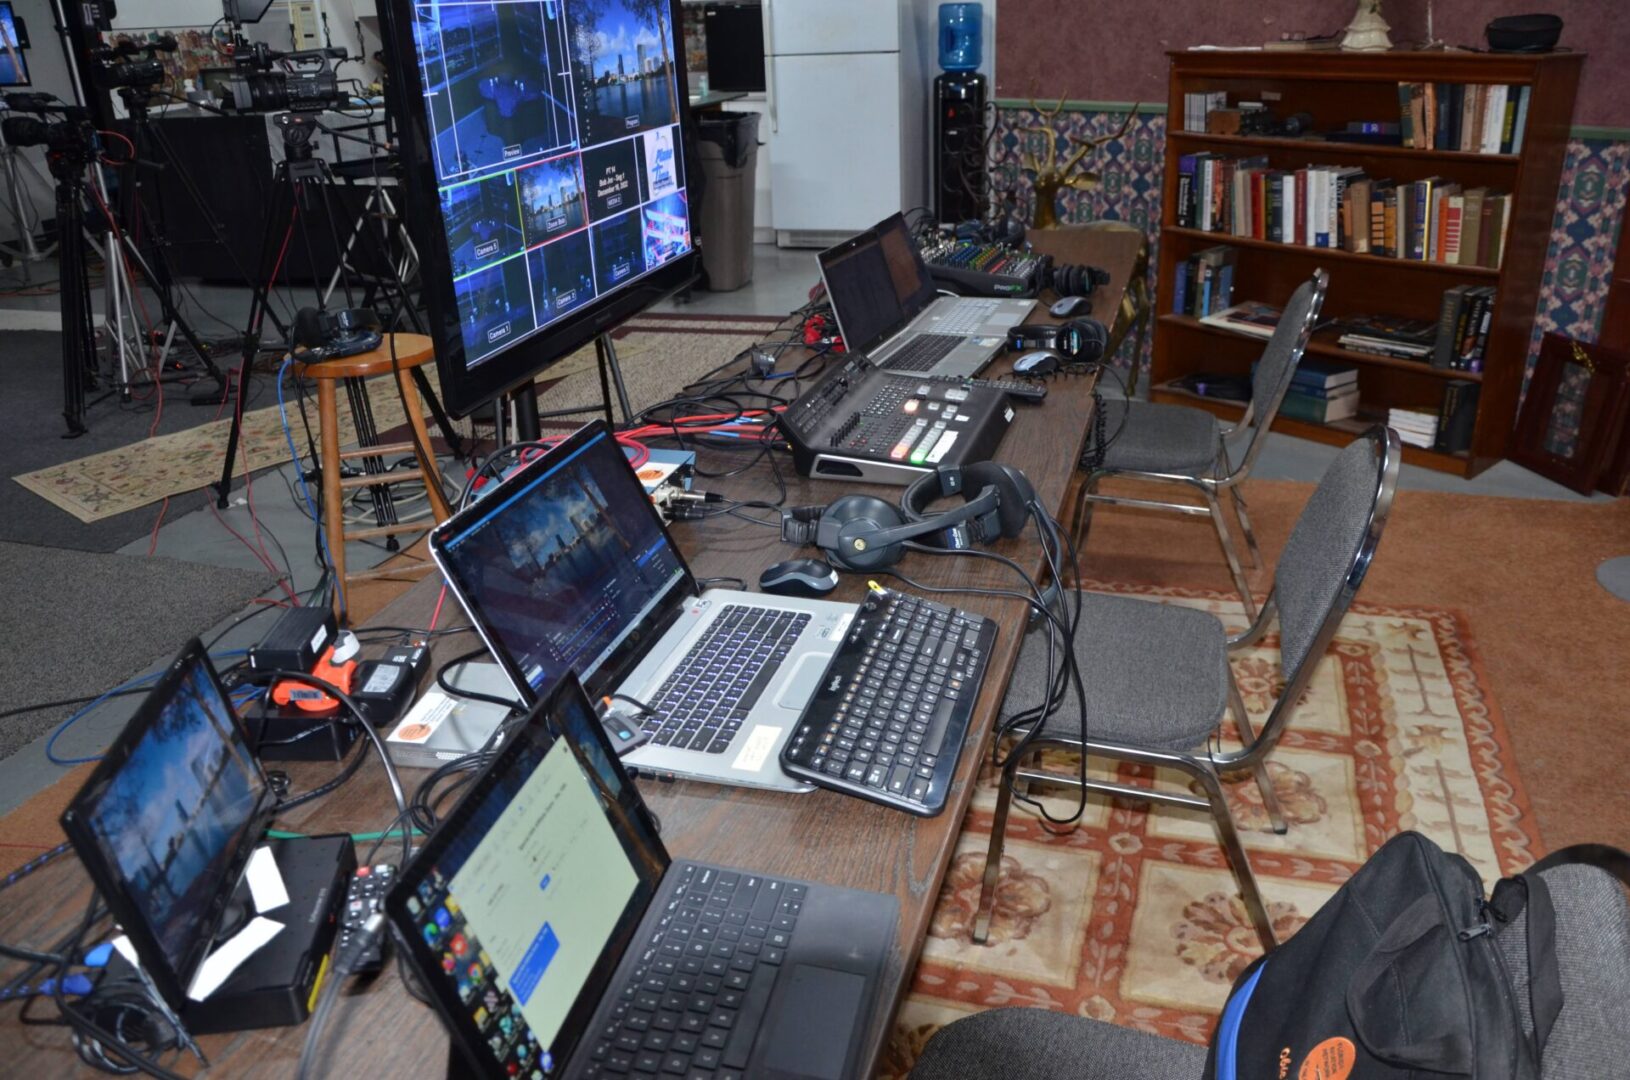 A room with many laptops and computers on the table